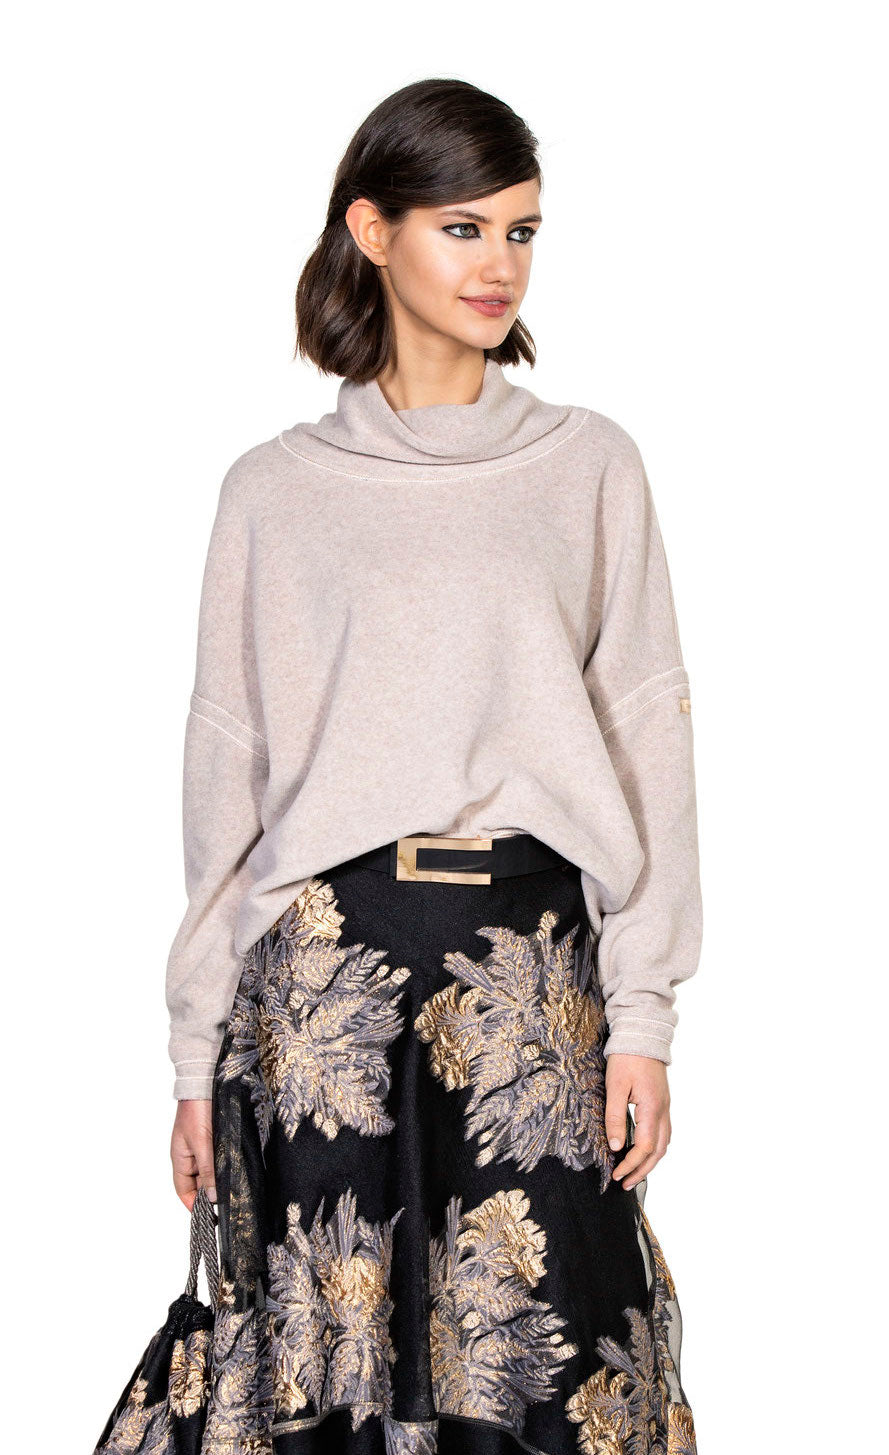 Front top half view of a woman wearing a skirt and the beate heymann cozy sweatshirt in the color nature. This color is cream/beige. The sweatshirt has drop shoulder long sleeves and a cowl neck.